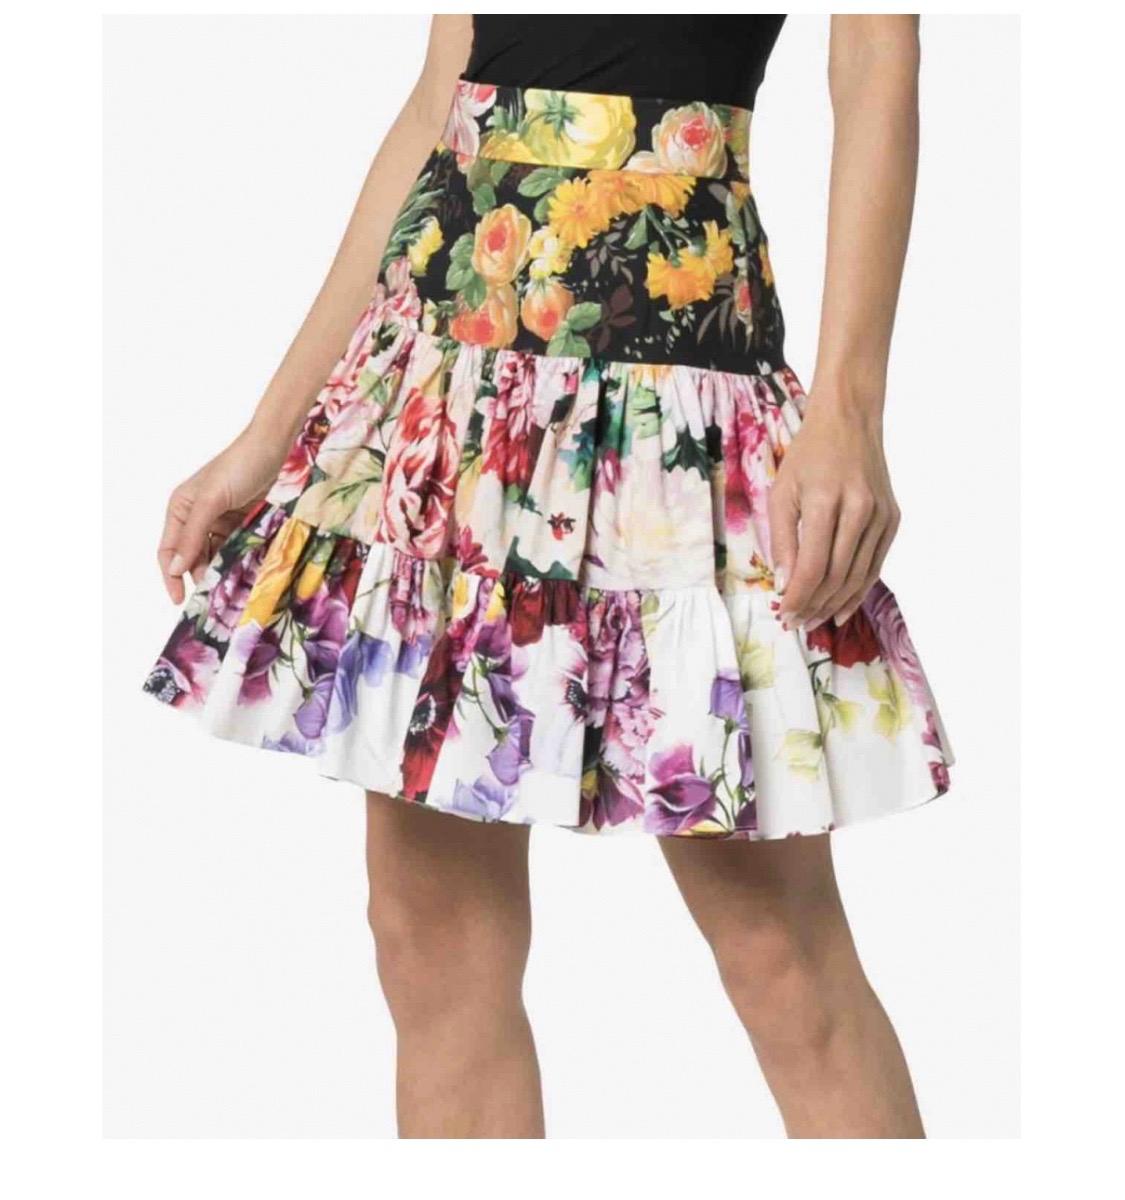 Dolce & Gabbana Multicolour Floral
cotton skirt
Size 42IT UK10, M.
100% cotton

Brand new with tags
Please check my other DG clothing,

beachwear, Sicily bags & accessories

and matching shoes!